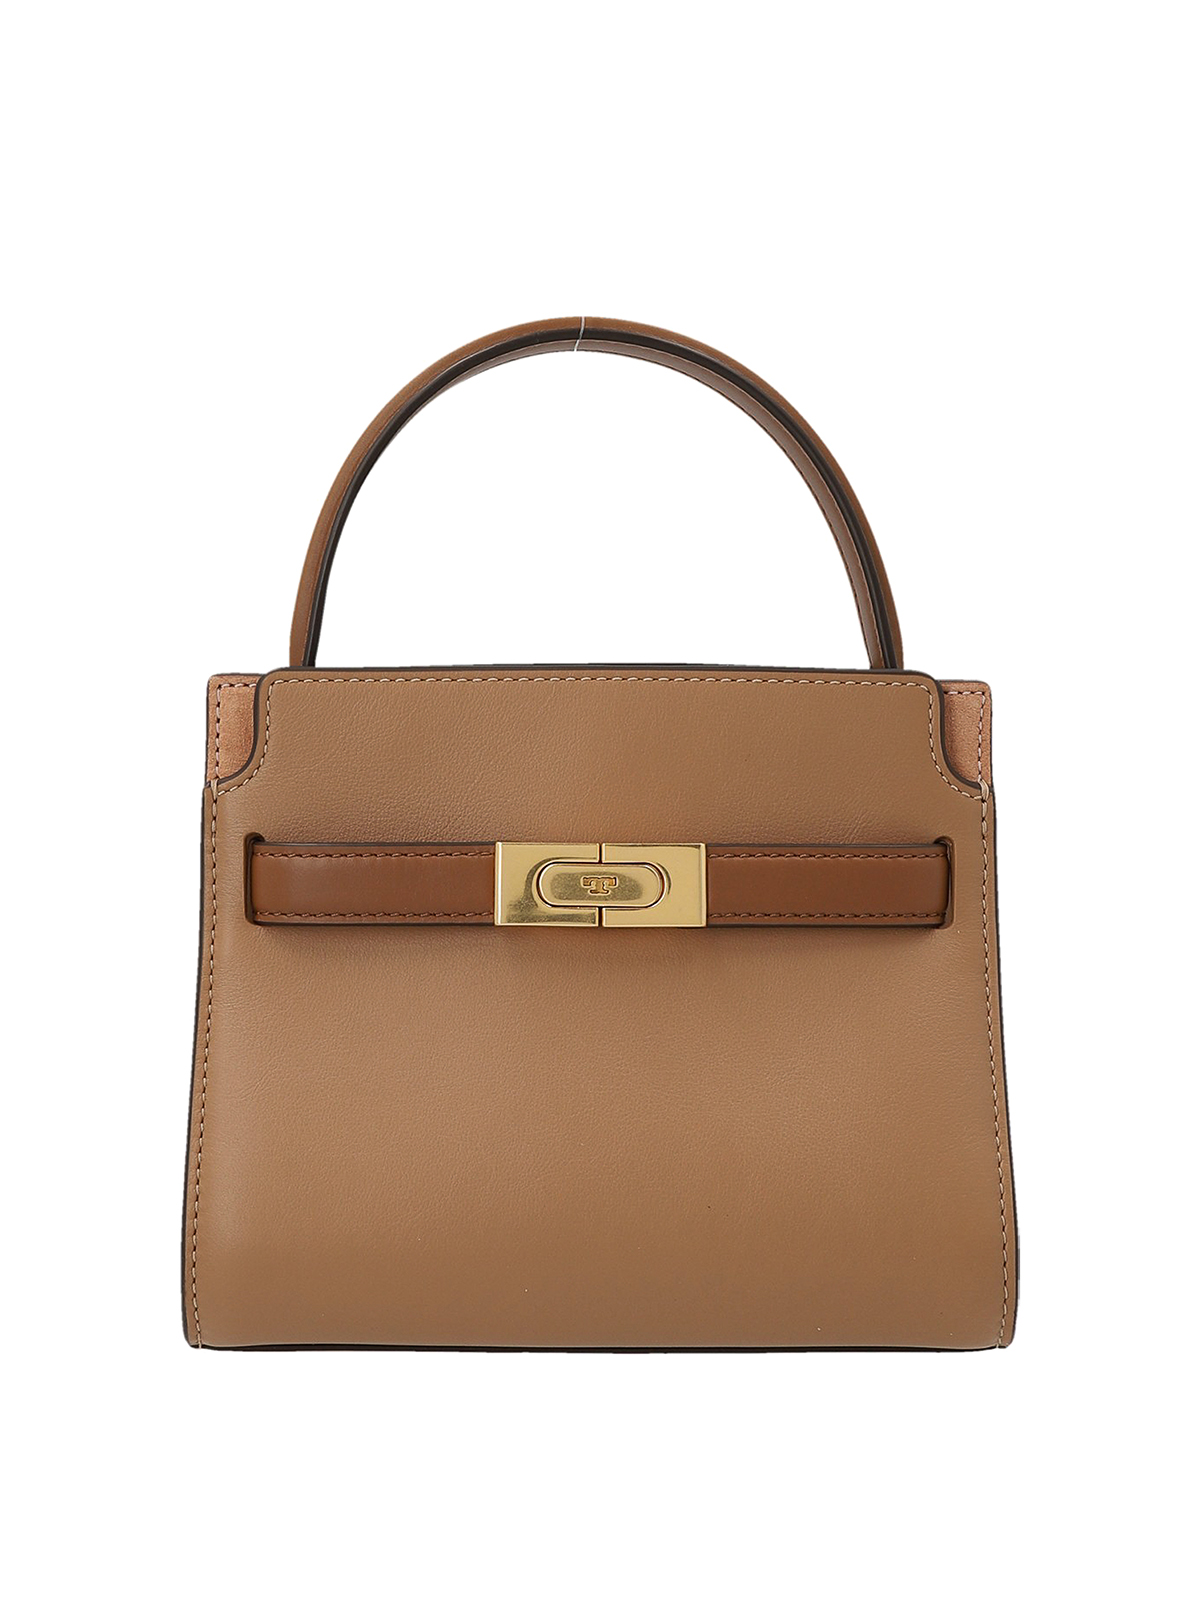 Tory Burch Lee Radziwill Double Tote Bag - Brown